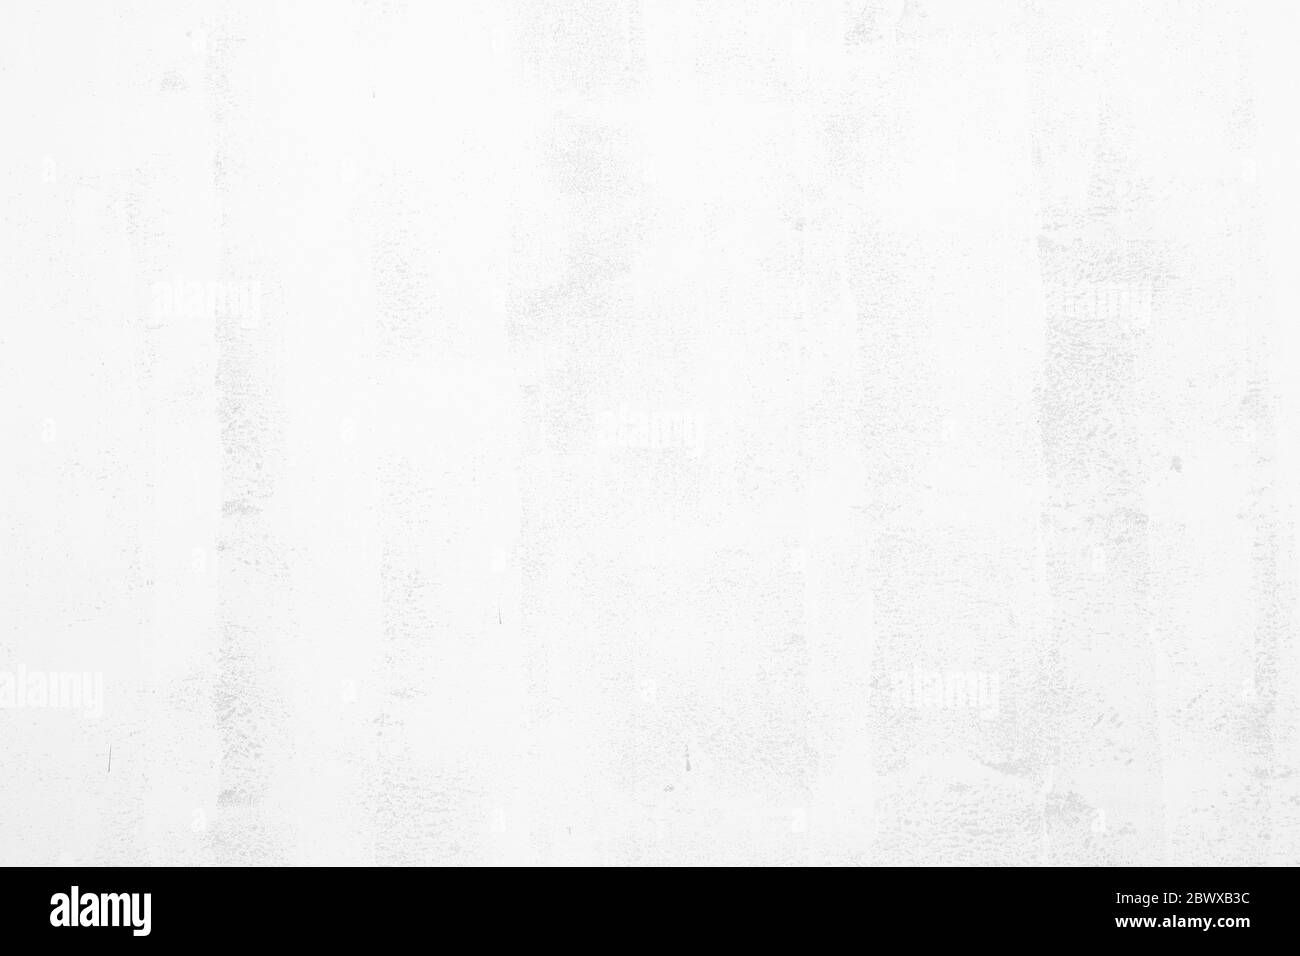 White Grunge Painting on Concrete Wall Texture Background. Stock Photo